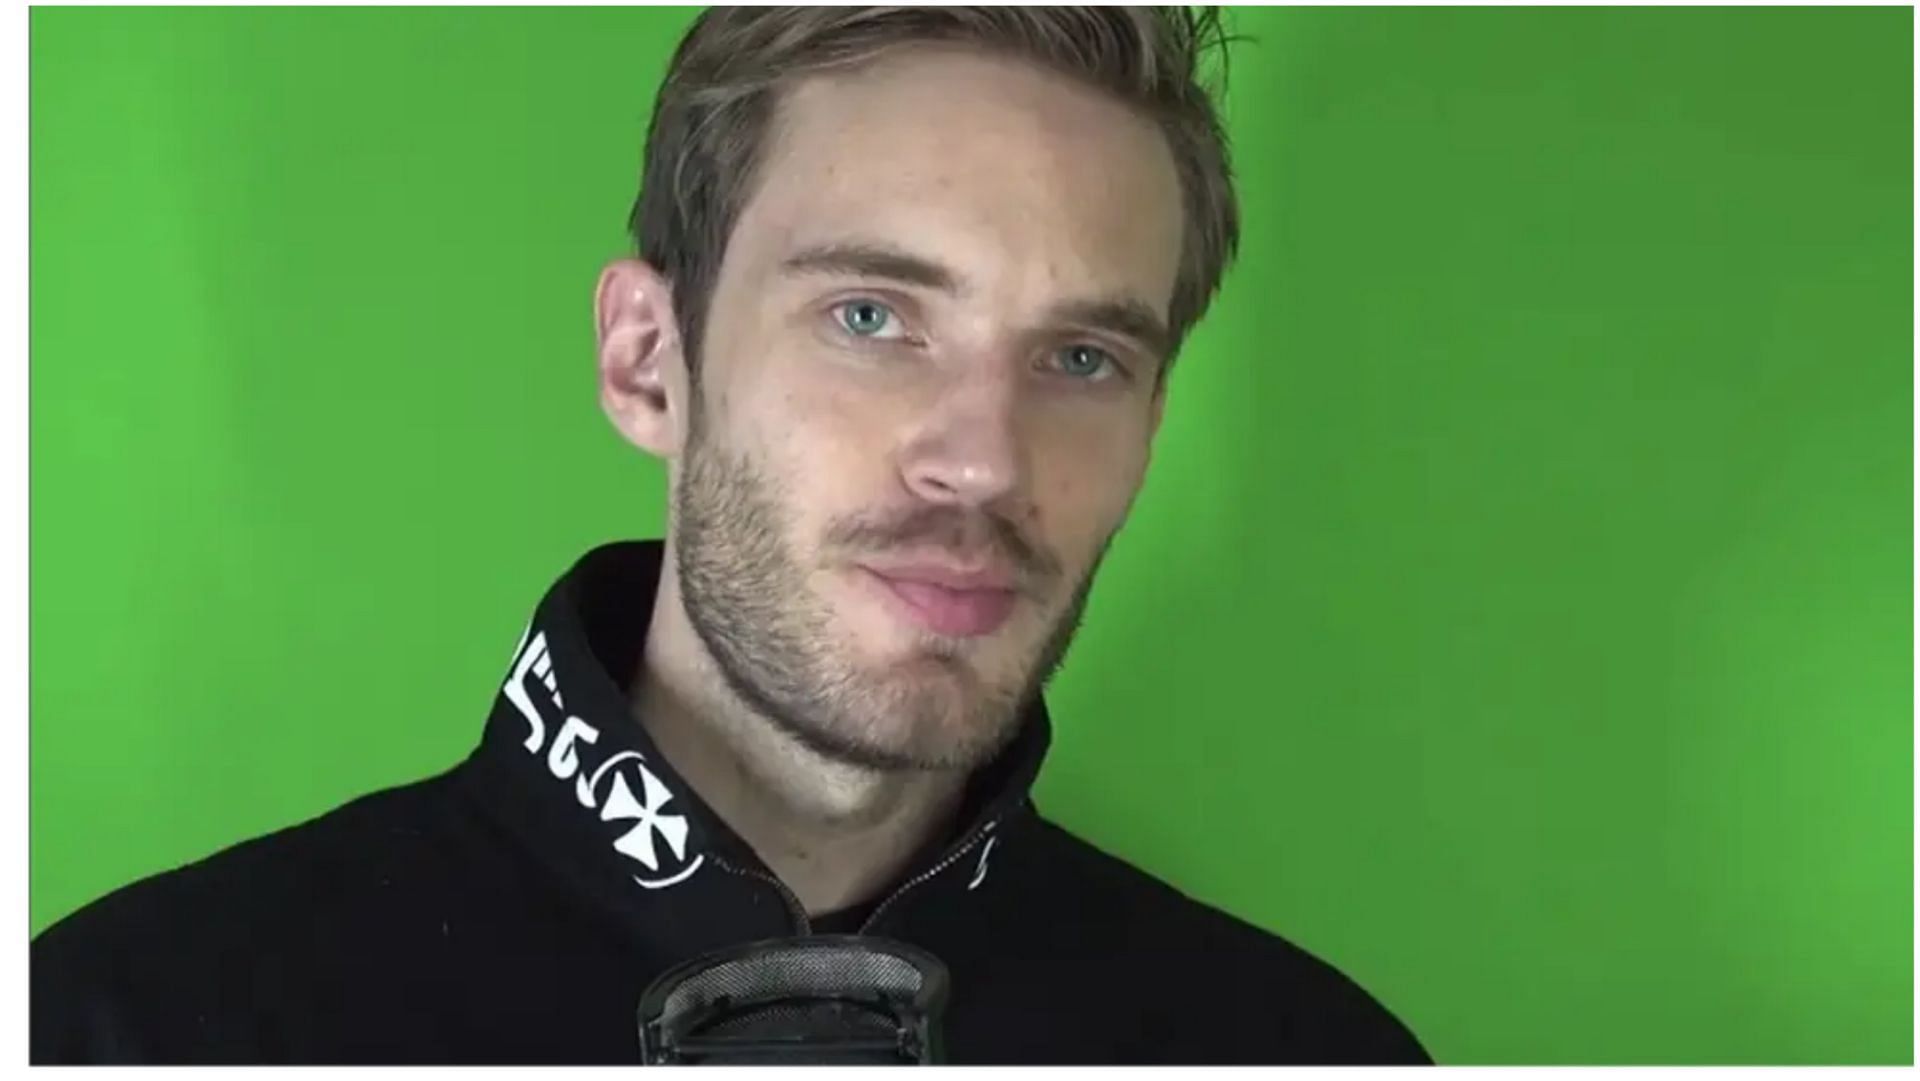 Pewdiepie is at the center of a debate around ableism following a clip of him mocking a deaf woman (Image via YouTube)